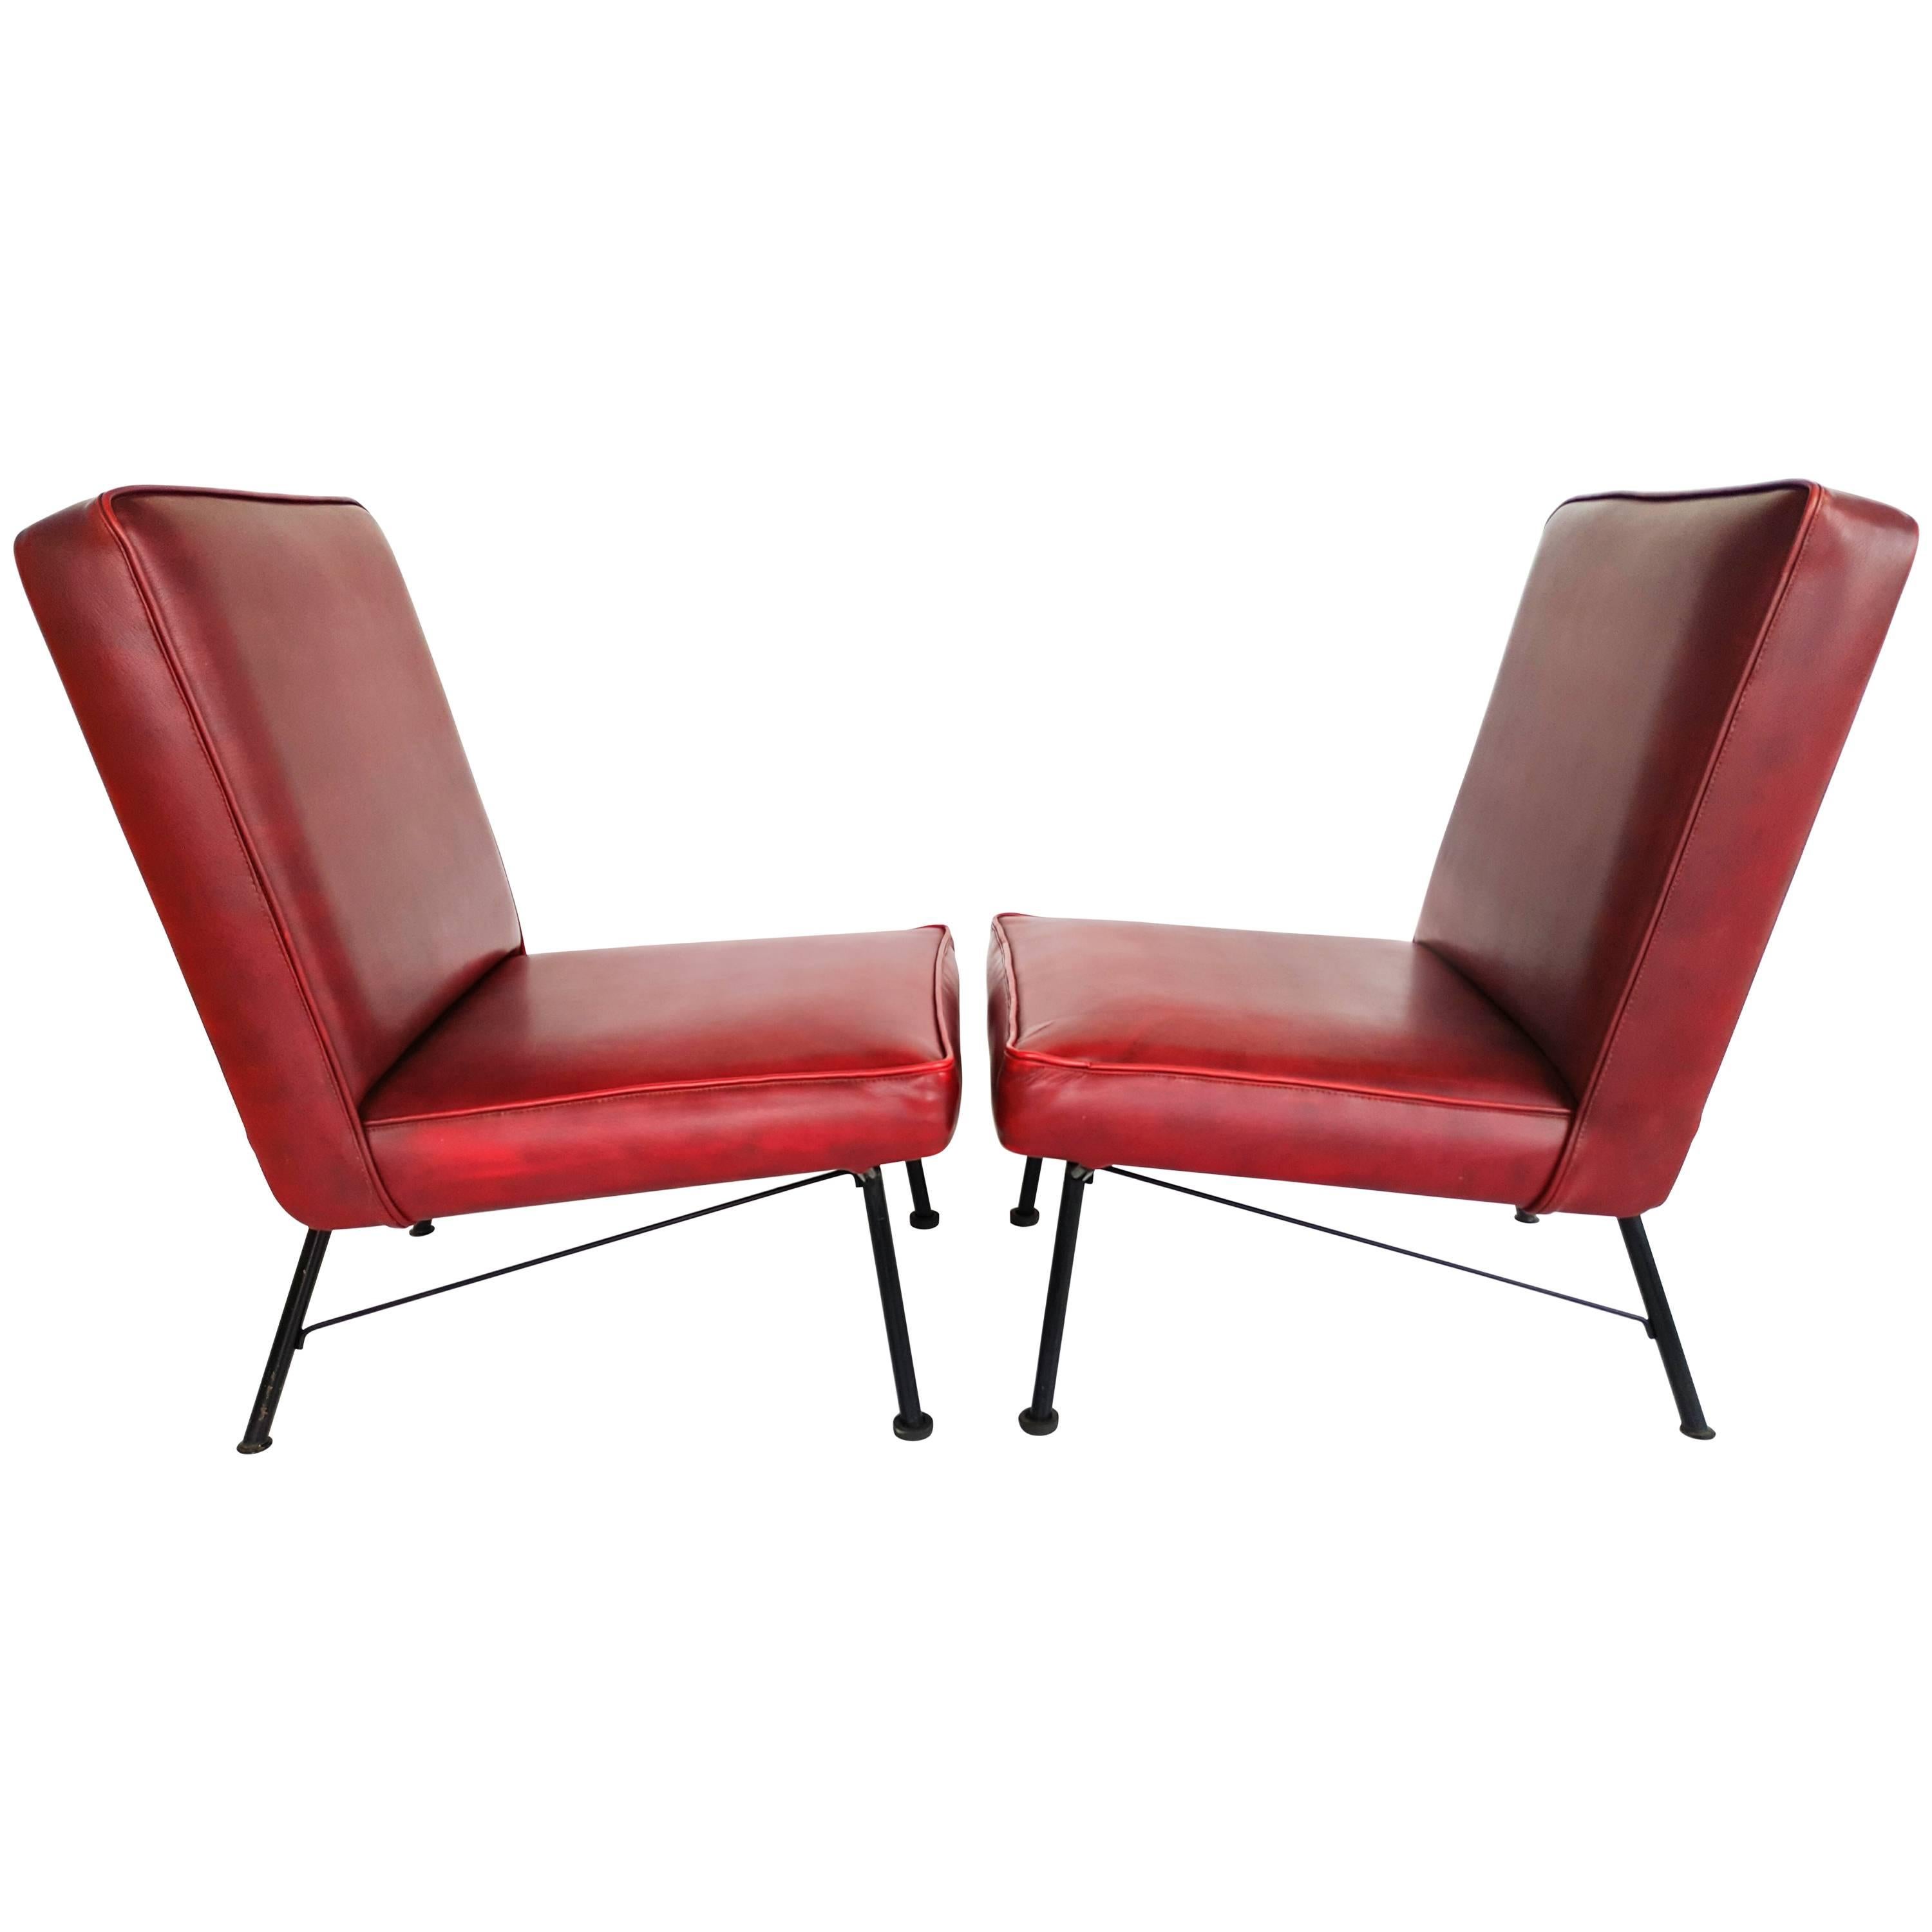 Pair of French Lounge Chairs, 1950s